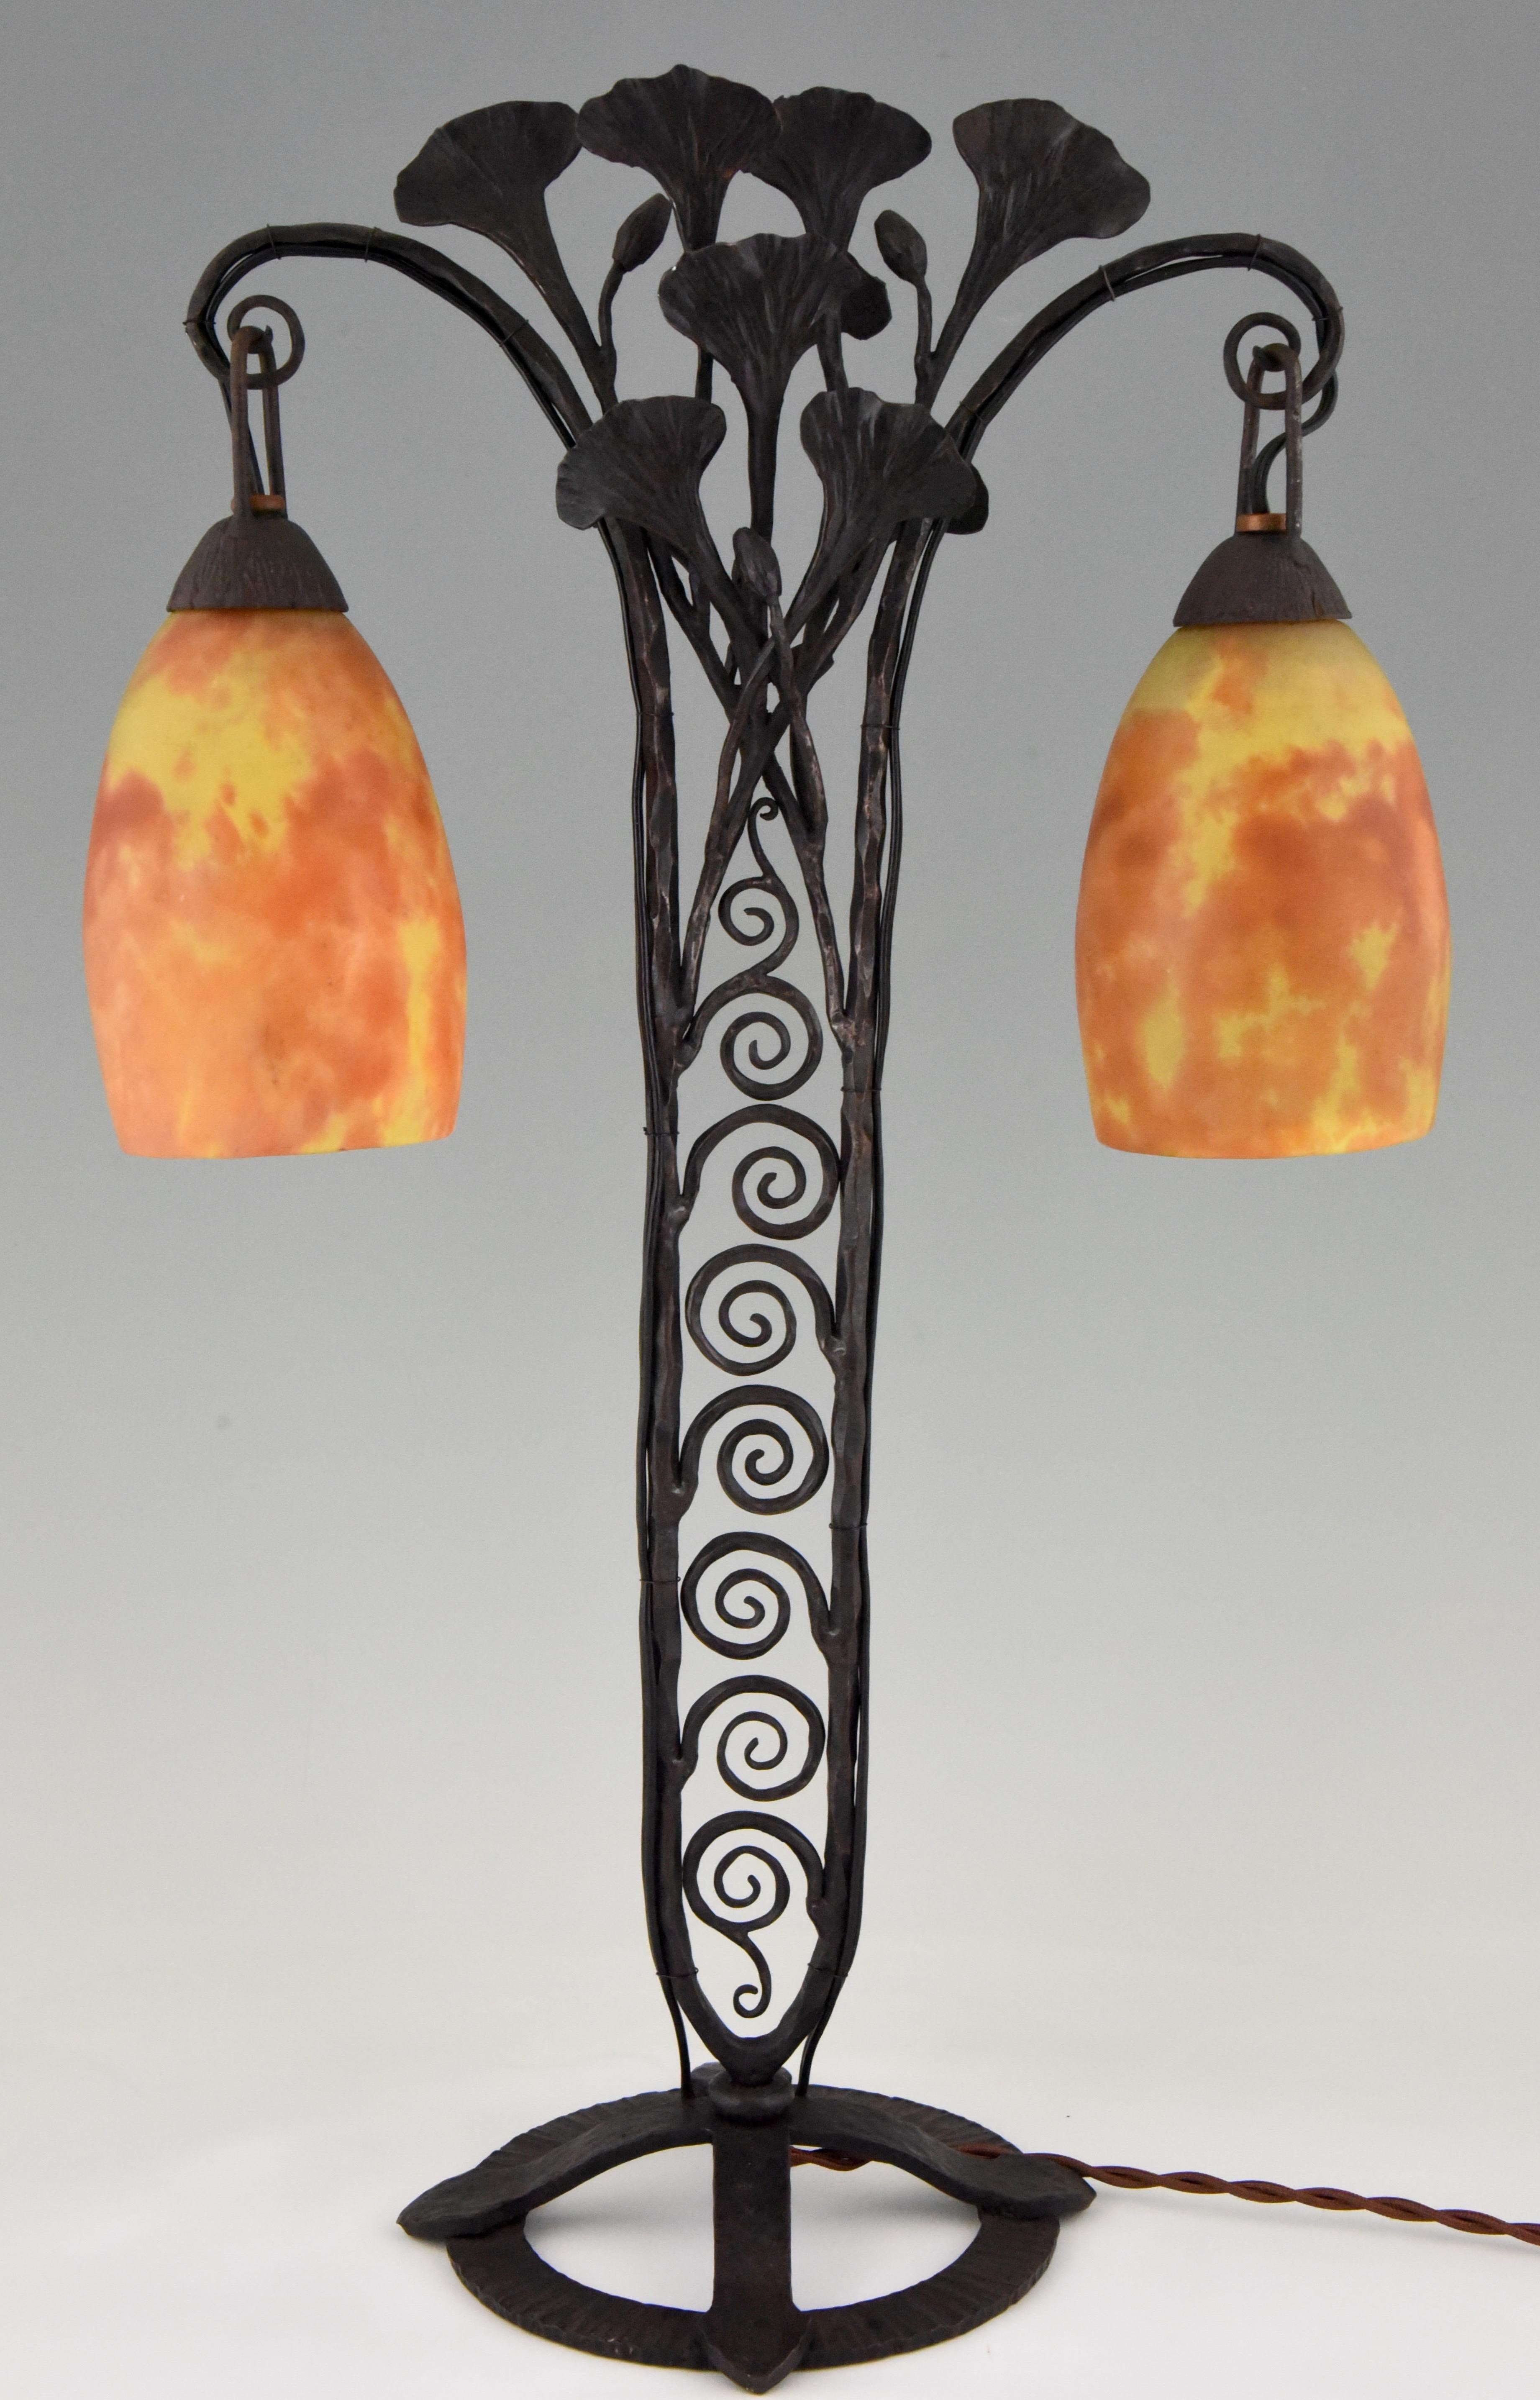 Beautiful Art Deco table lamp with two daum glass shades in orange and yellow tones. Signed on the glass. The base is in wrought iron and decorated with leaves, France, 1925.